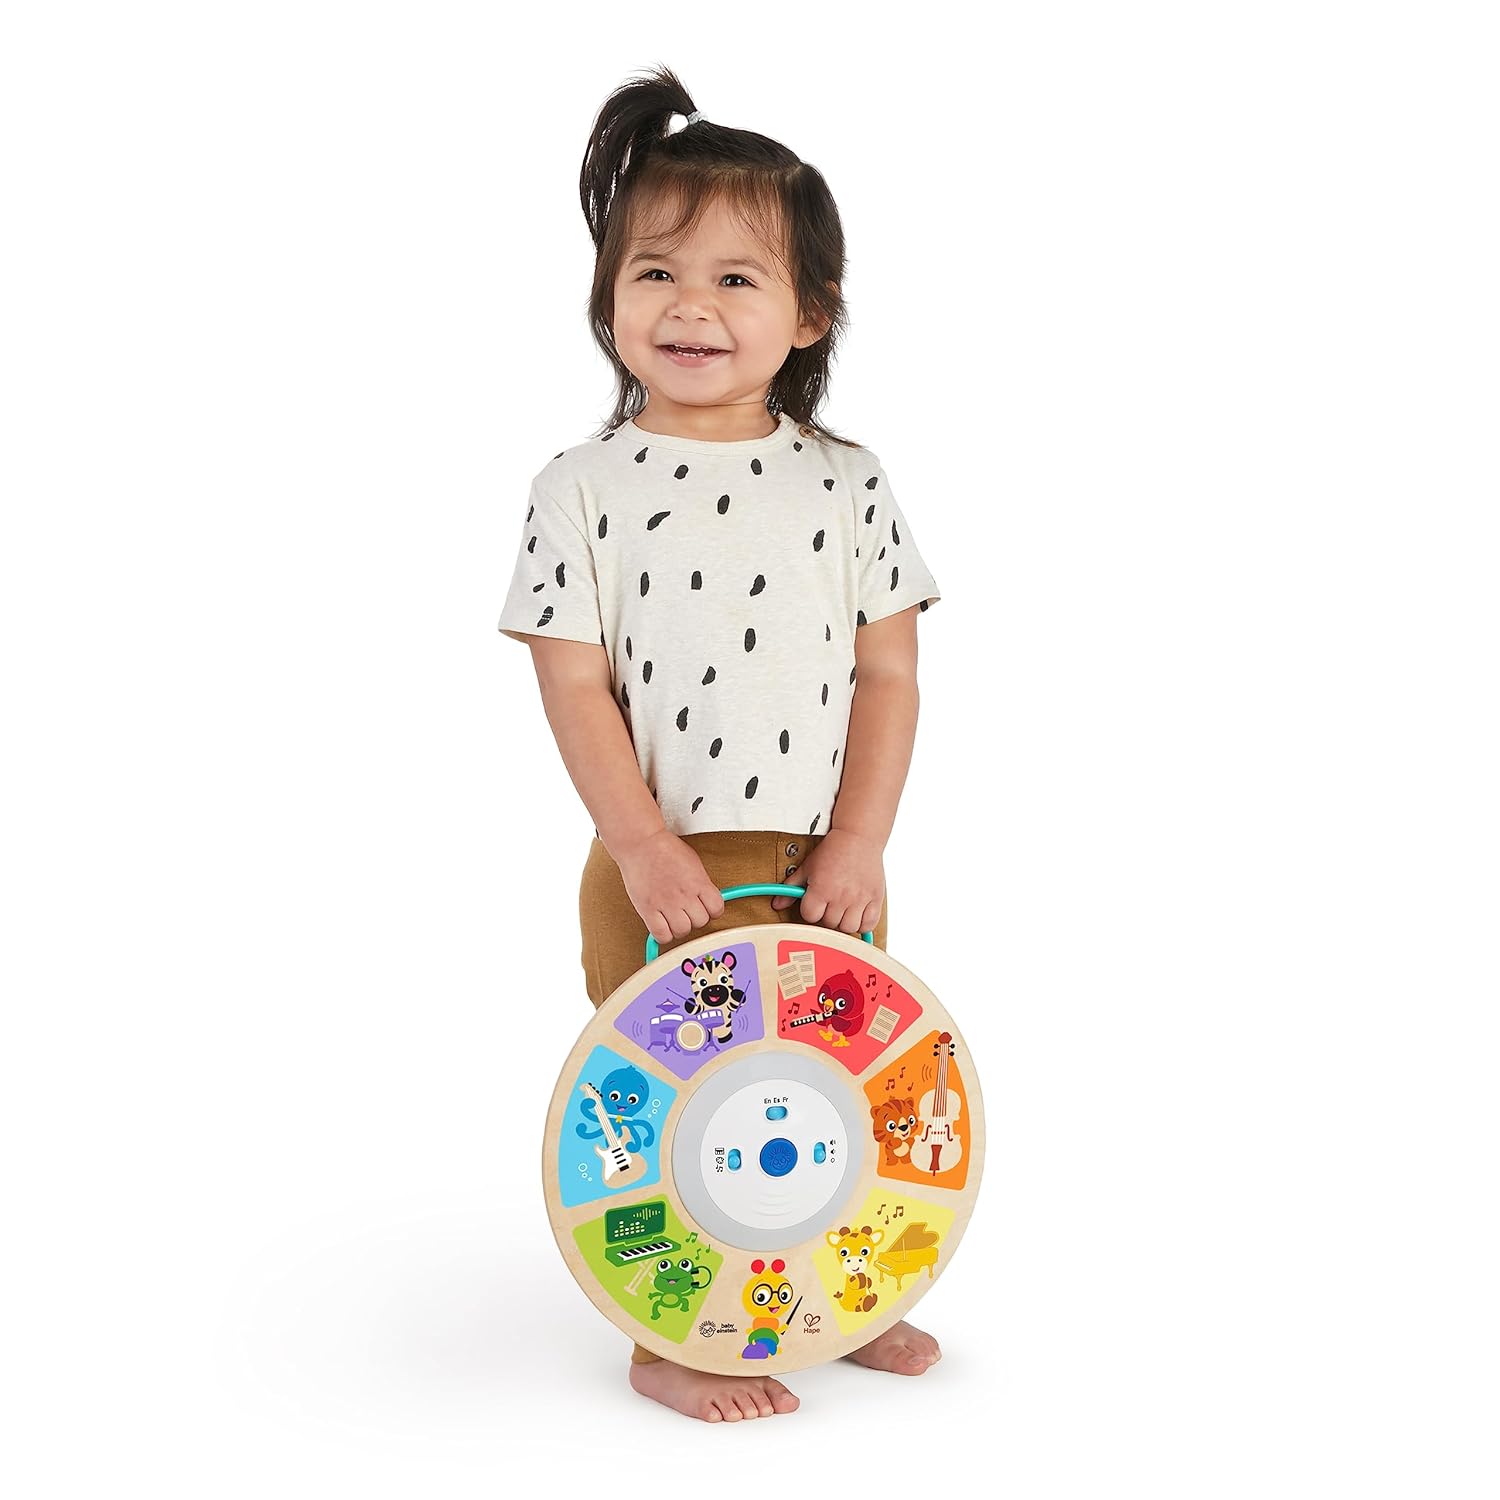 Baby Einstein Cal's Smart Sounds Symphony Magic Touch Wooden Electronic Activity Toy